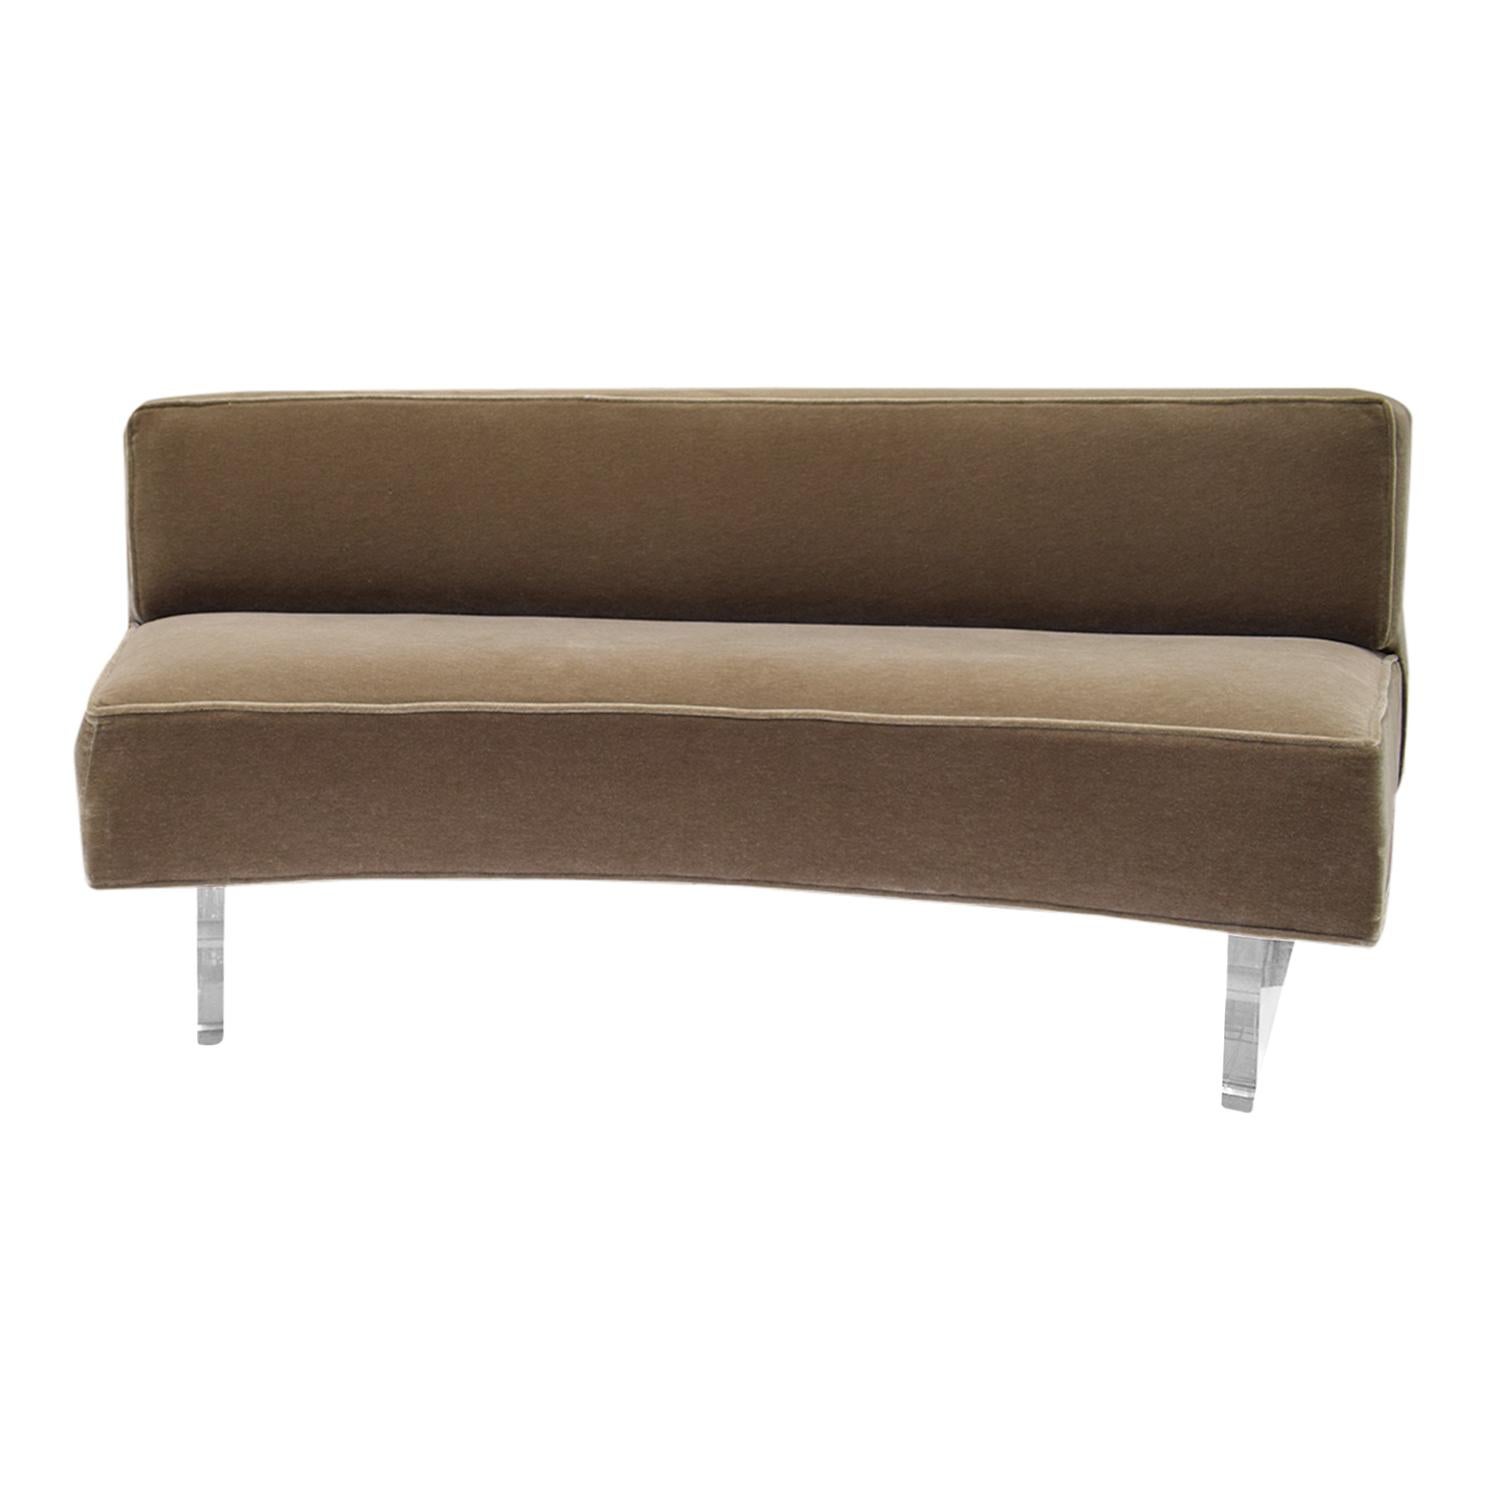 American Vladimir Kagan Custom Curved Omnibus Sofa with Lucite Bases 1990s 'Signed'